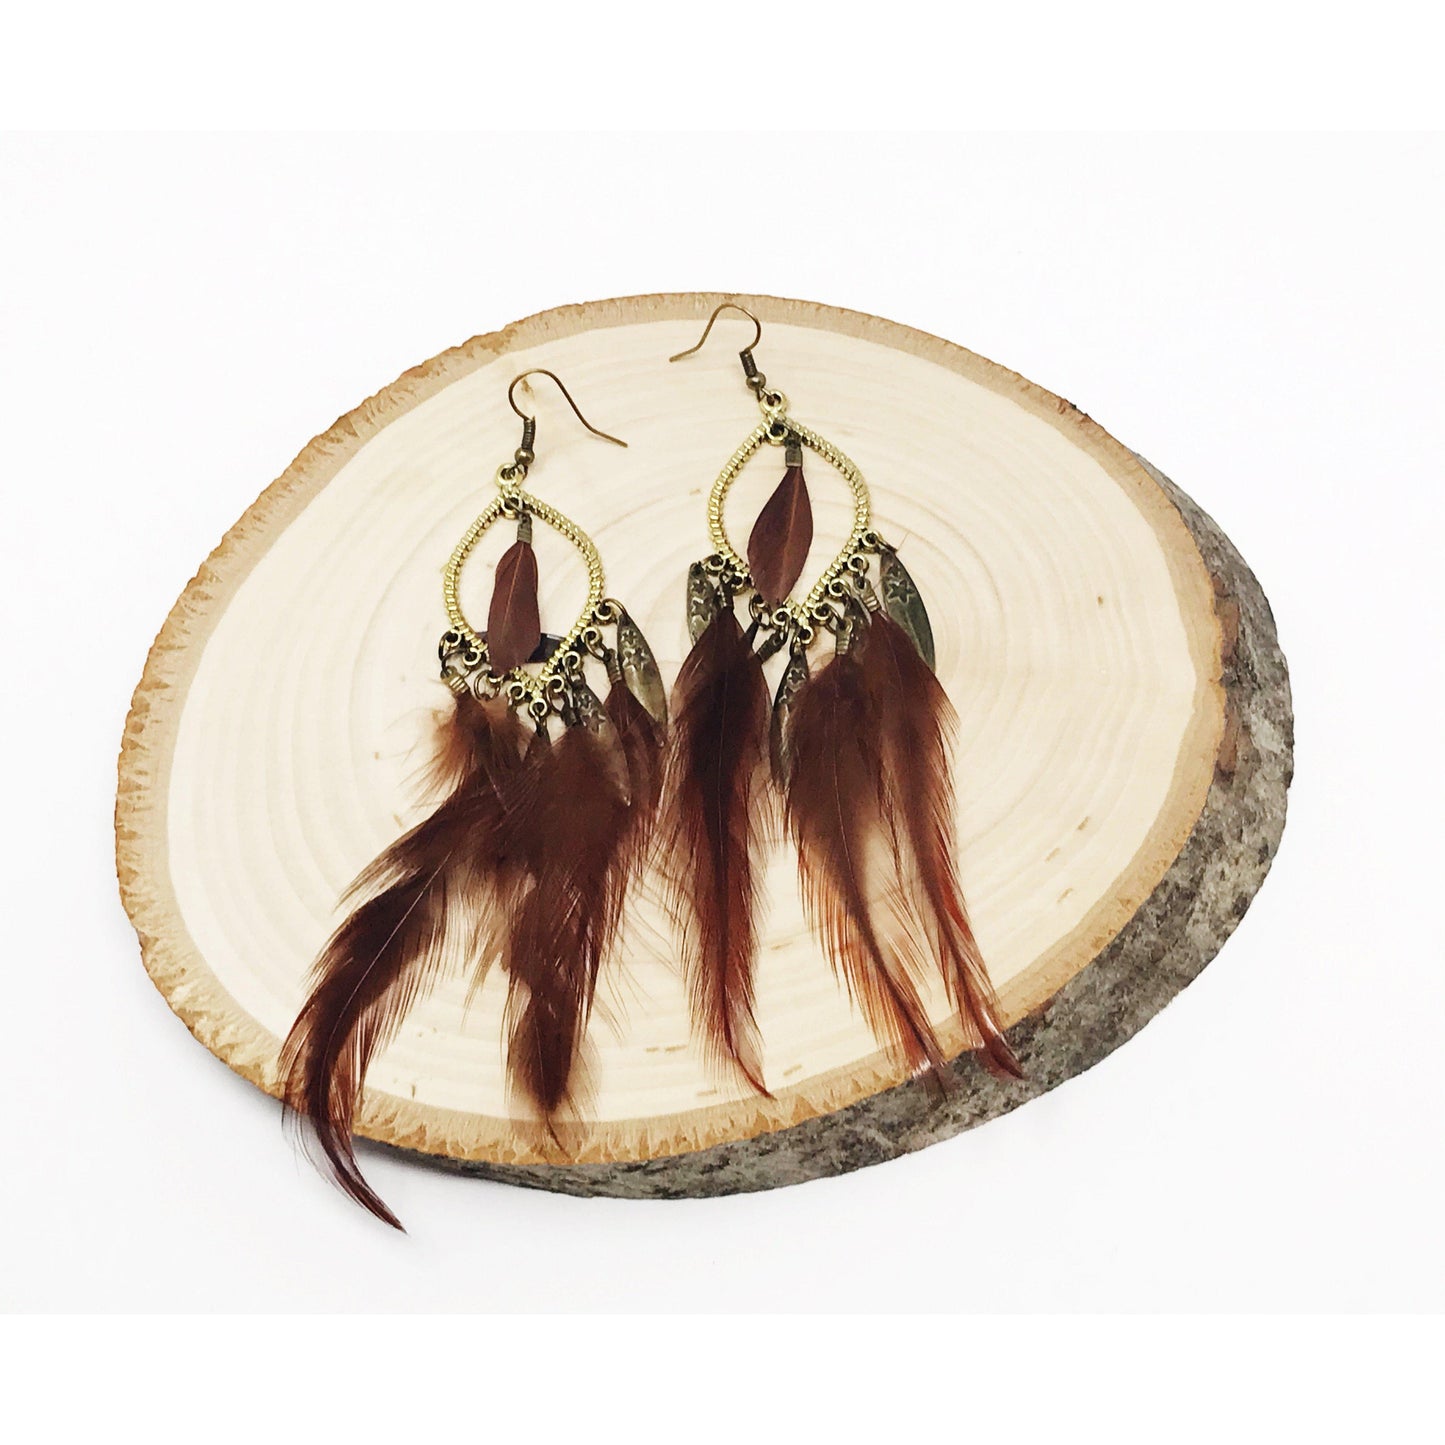 Dark Brown Feather Dangle Earrings: Boho-Chic Accessories for Nature-Inspired Style